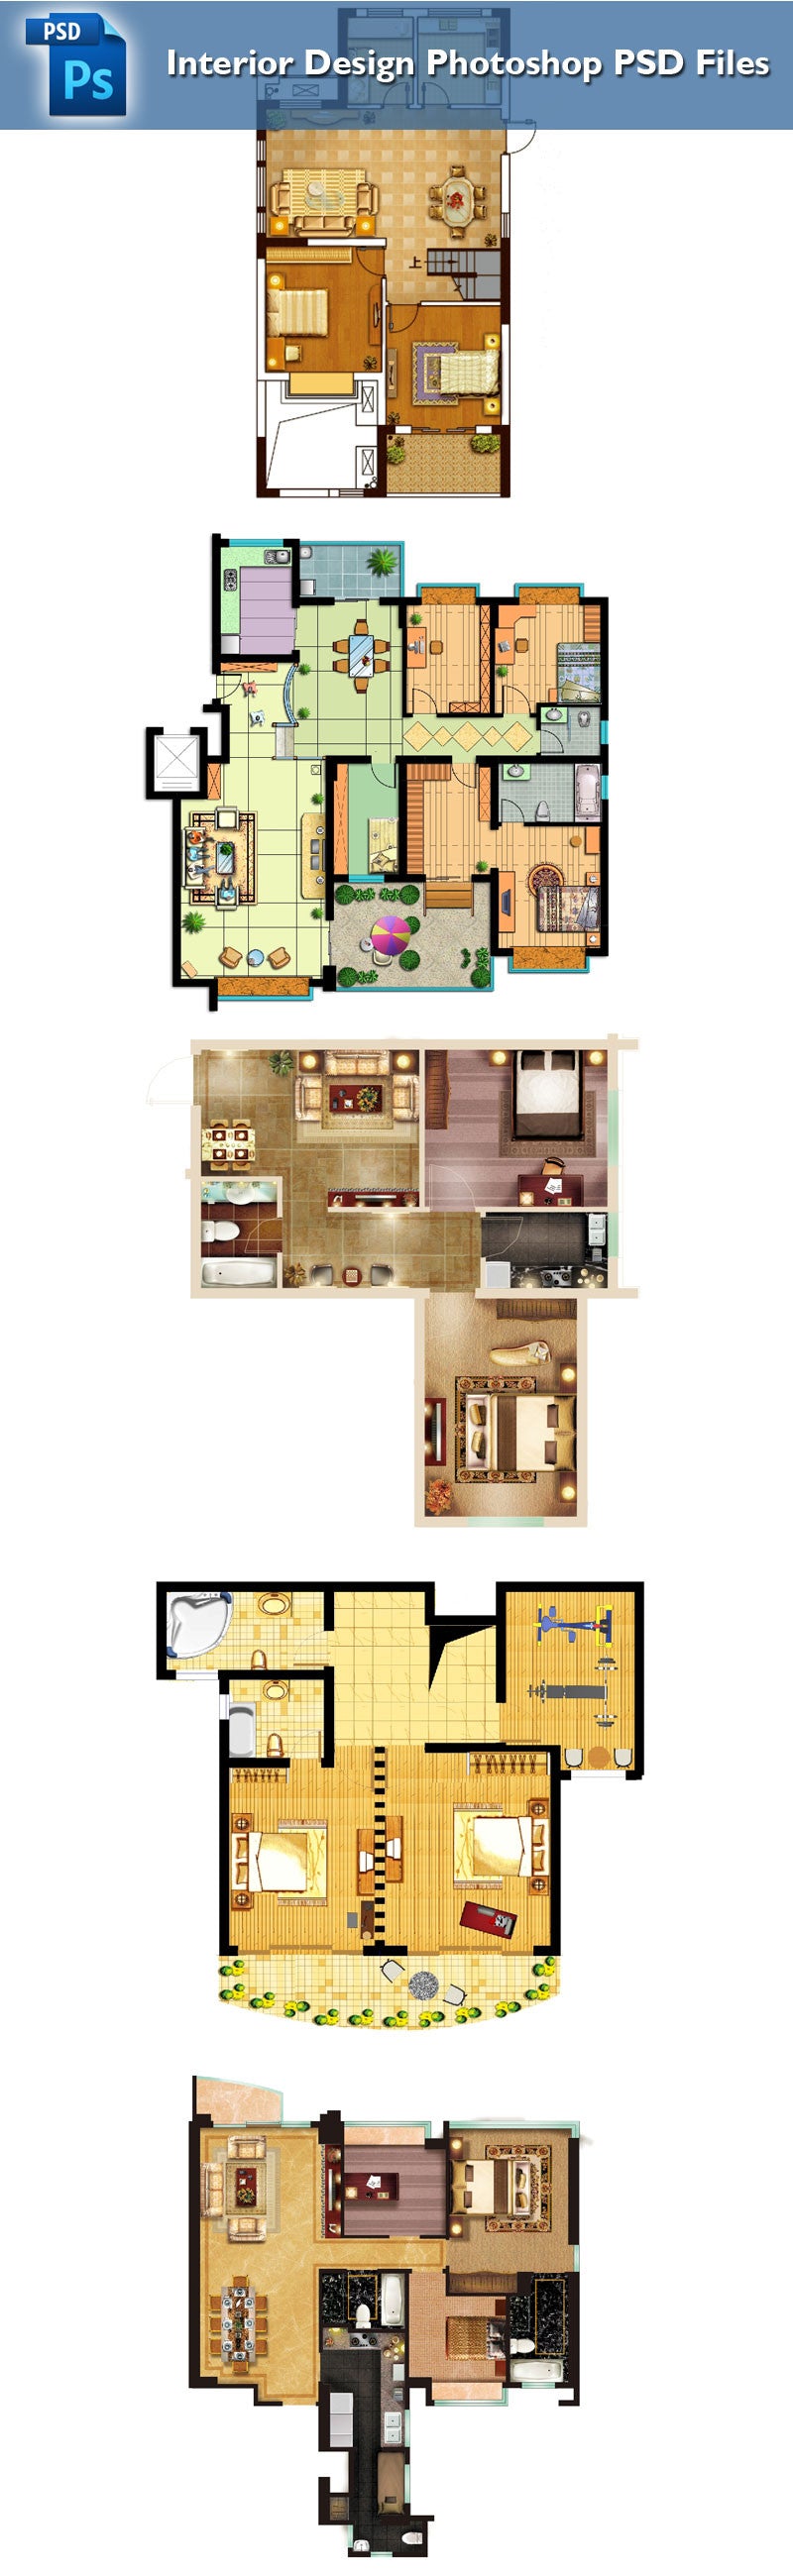 15 Types of Interior Design Layouts Photoshop PSD Template V.3